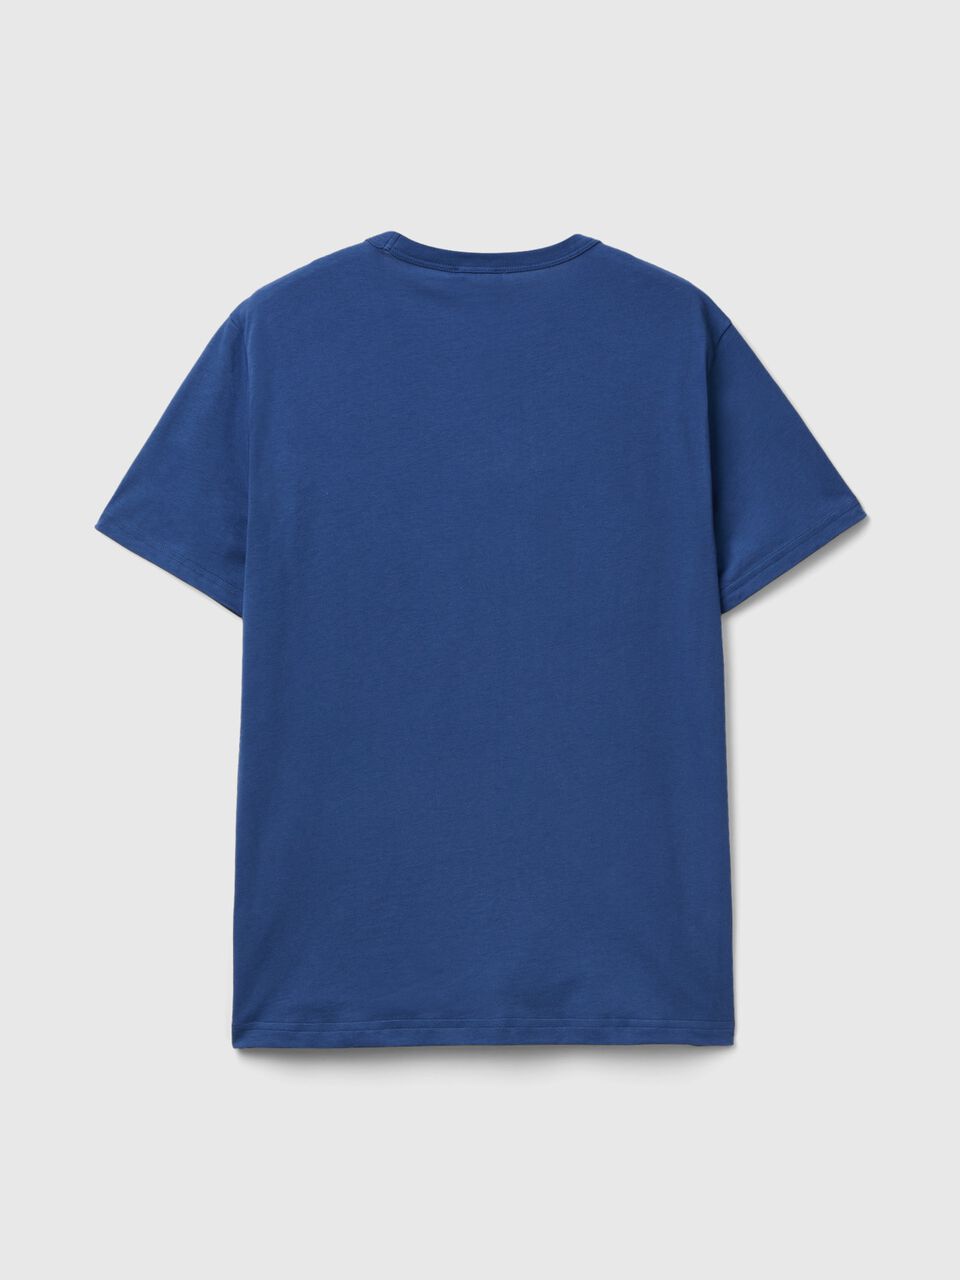 Benetton with blue force | - Blue print Force cotton in organic Air logo Air t-shirt